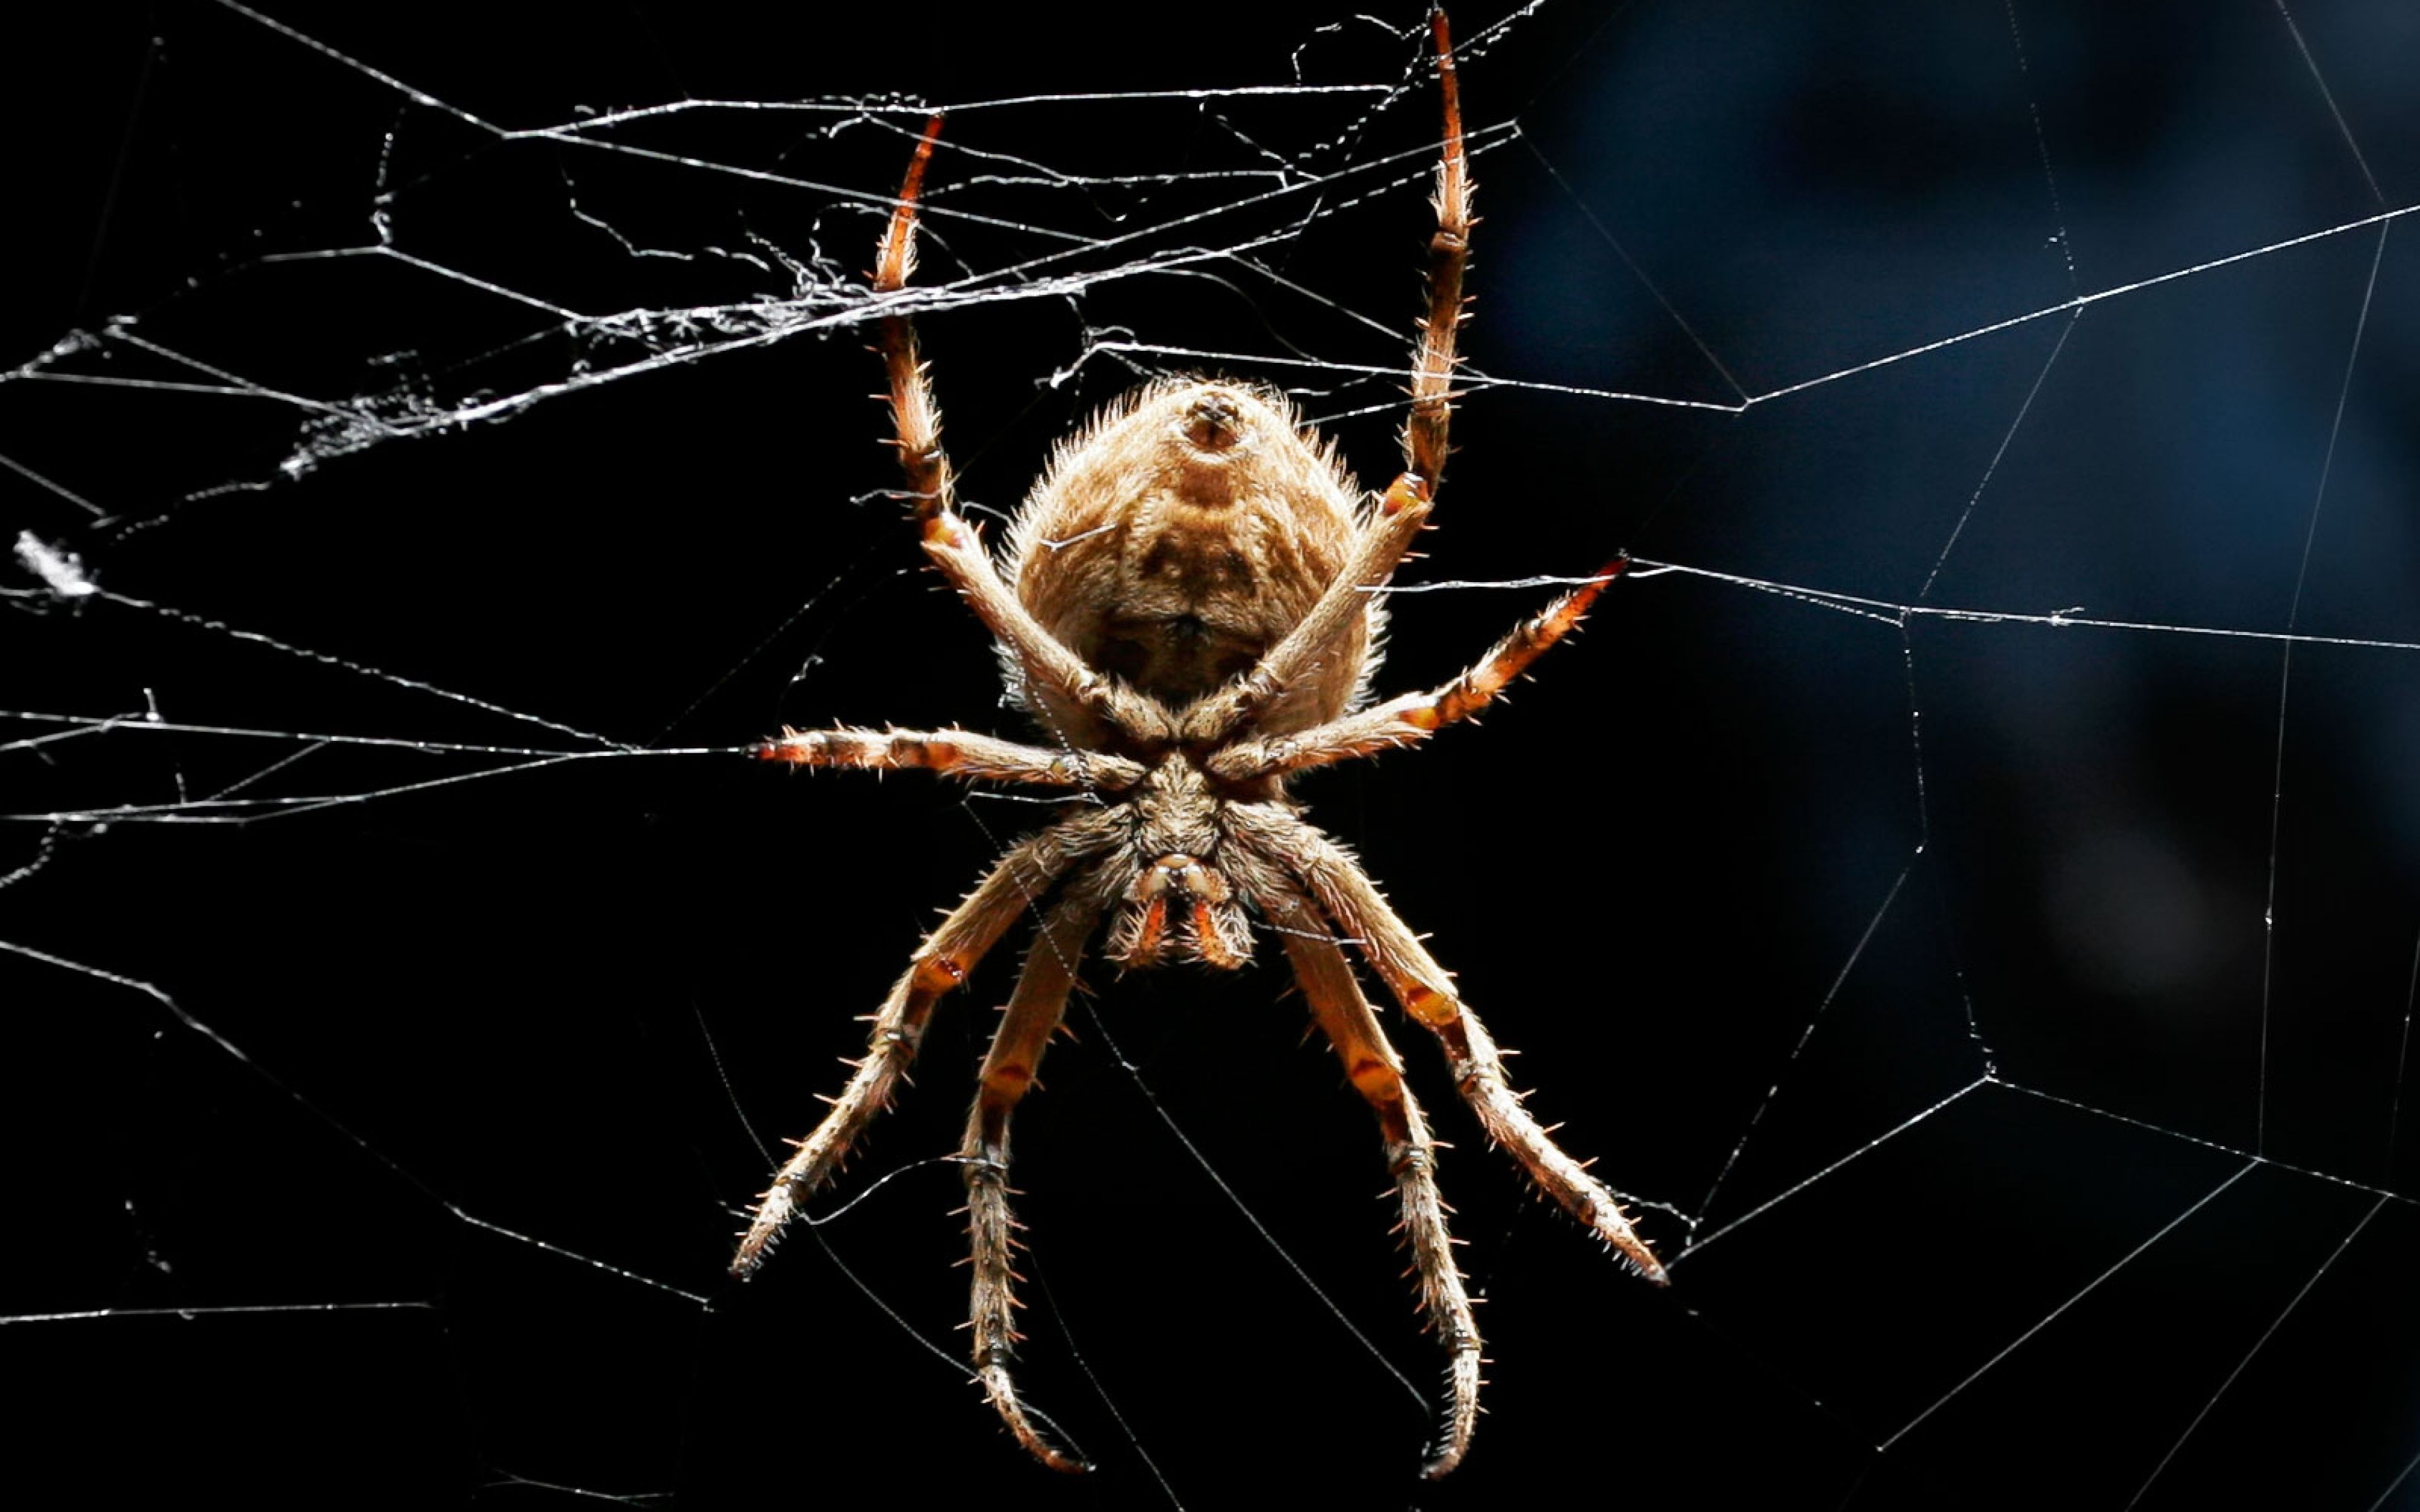 Download Wallpaper 3840x2400 Spider, Legs, Web, Crawling, Insect ...